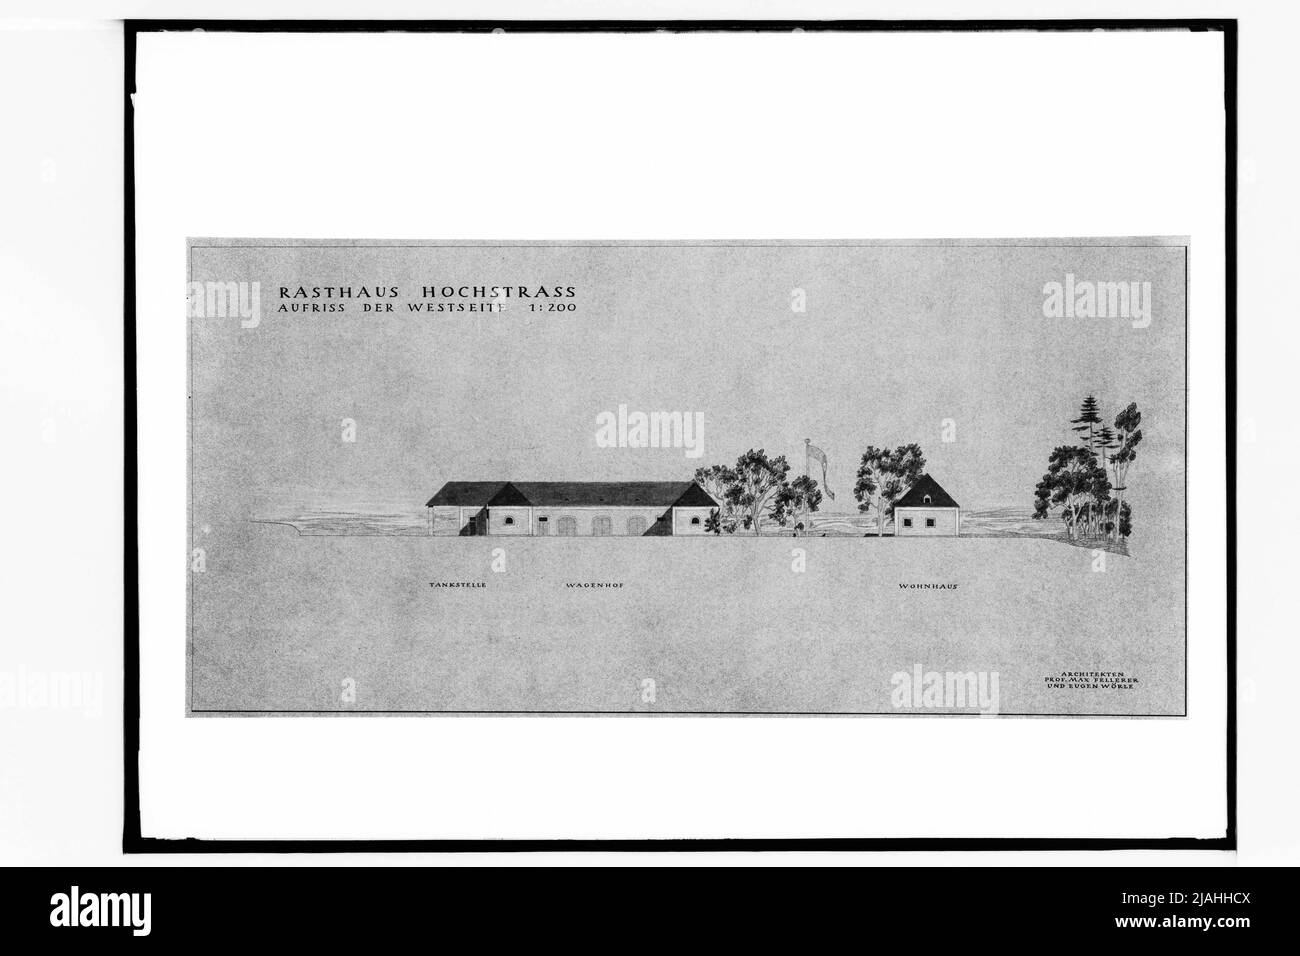 Design for the Rasthaus Hochstraß on the Reichsautobahn (on the sidelines of the west side) Stock Photo